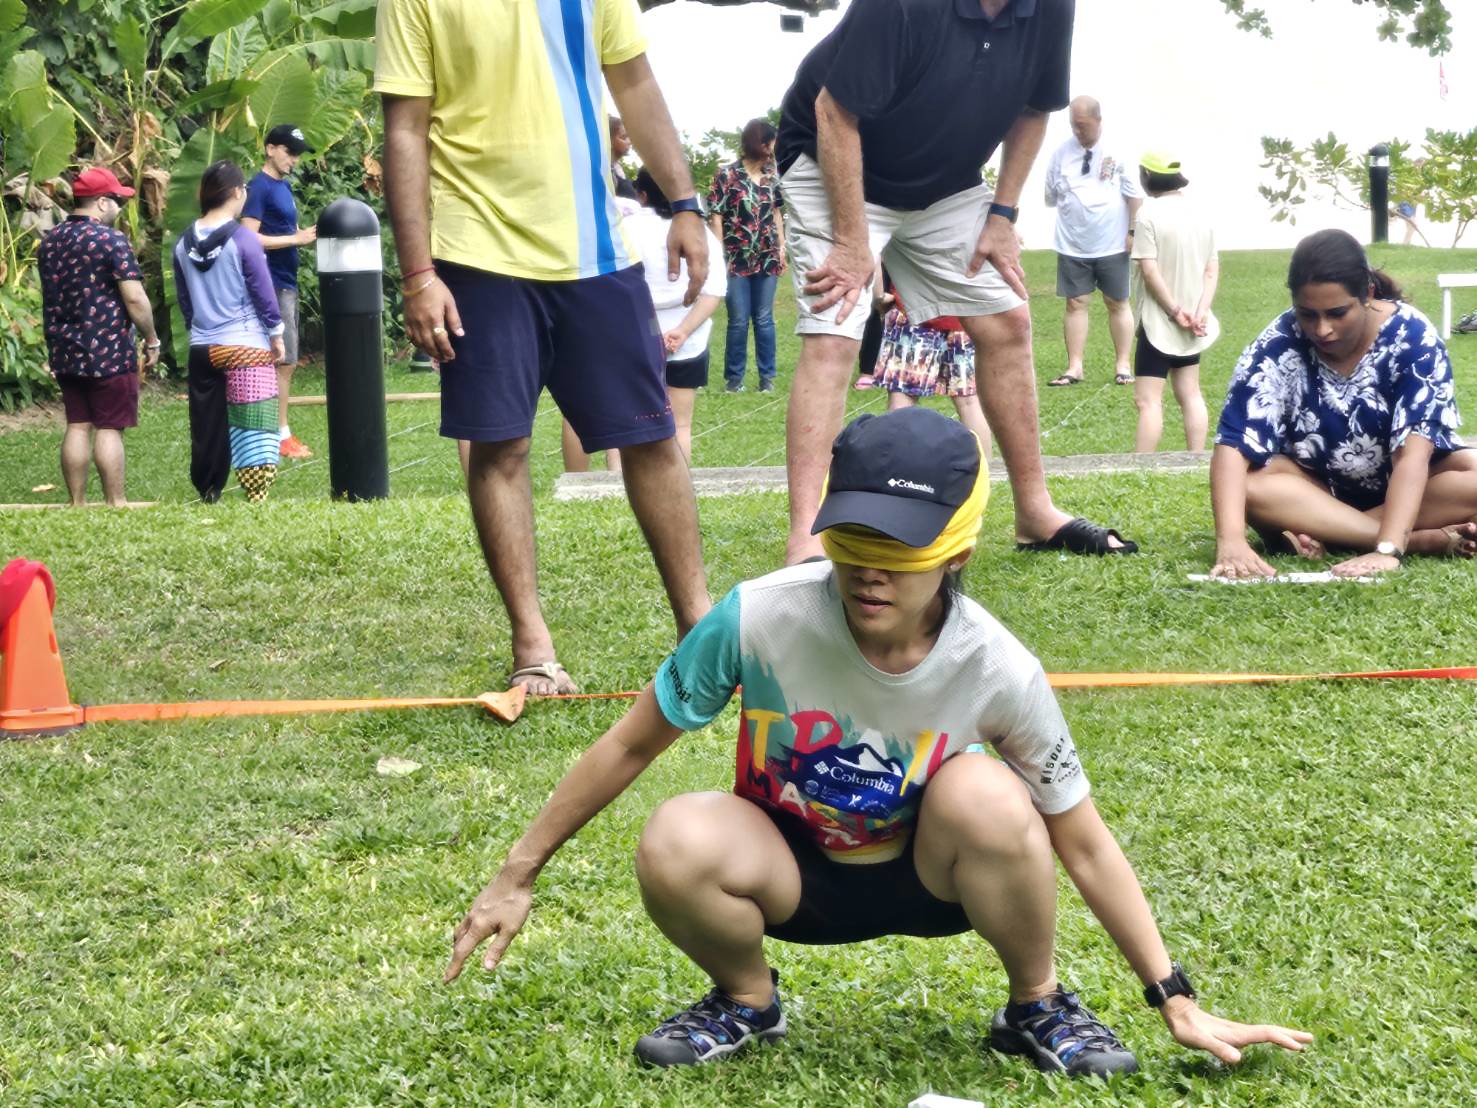 The Amazing Race for SpaceMatrix in Phuket is designed as a high-energy and competitive team-building experience that challenges participants